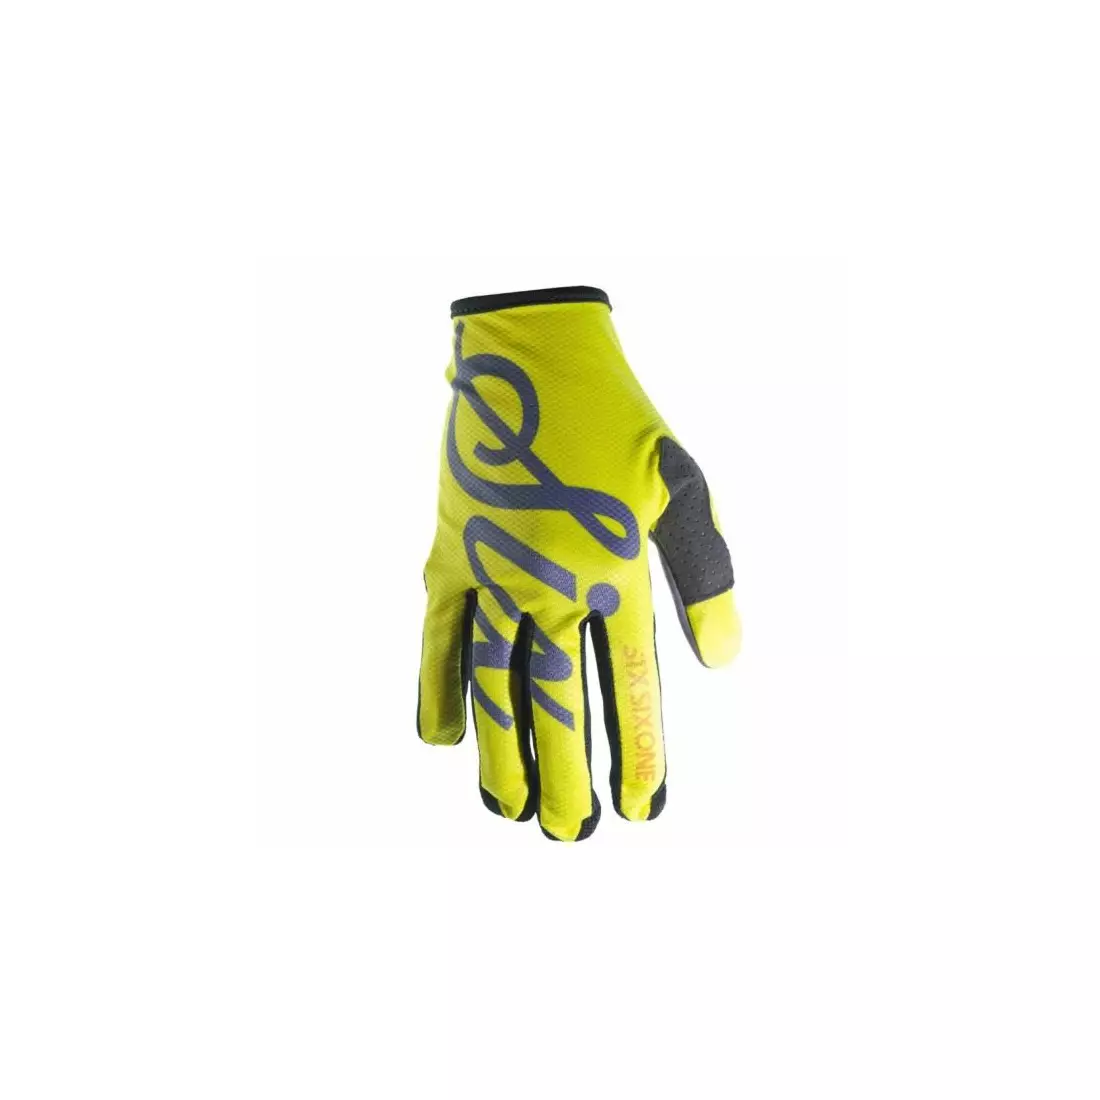 661 cycling gloves COMP yellow long finger